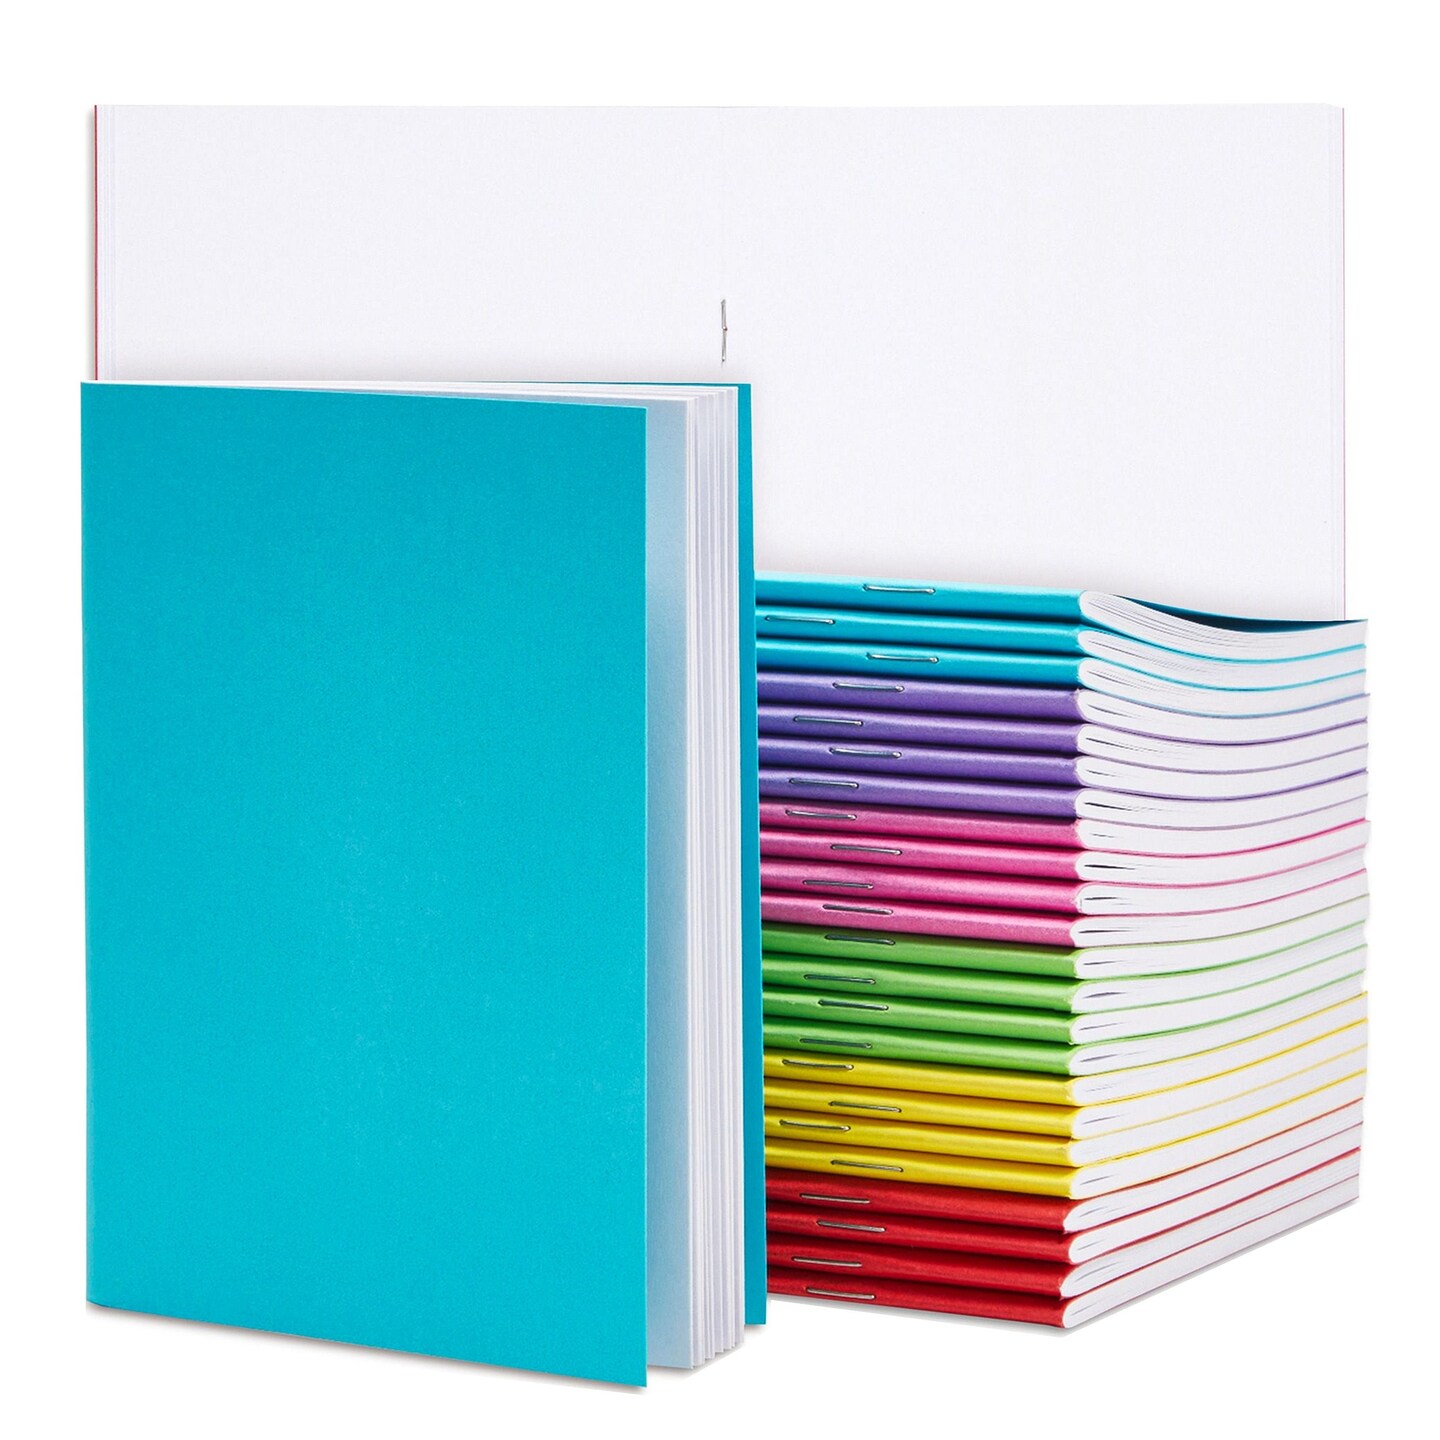 Upper Midland Products 55 Pk Mini Notebooks Journals Blank Paper Books For  Kids Students Assorted Vibrant Colors 24 Pages (4.25 x 5.5 Inches) - Bulk